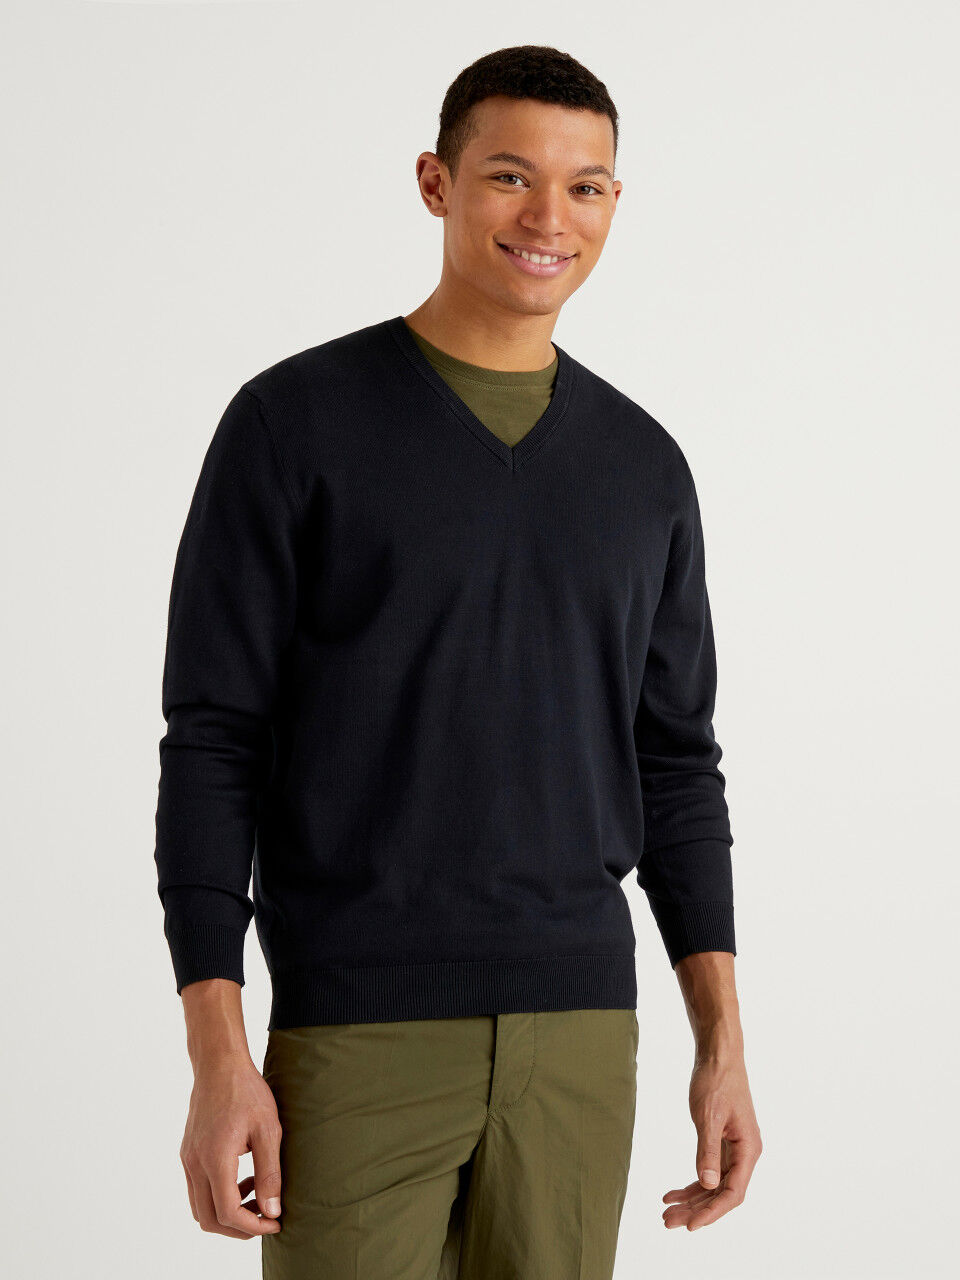 Men's V-Neck Sweaters New Collection 